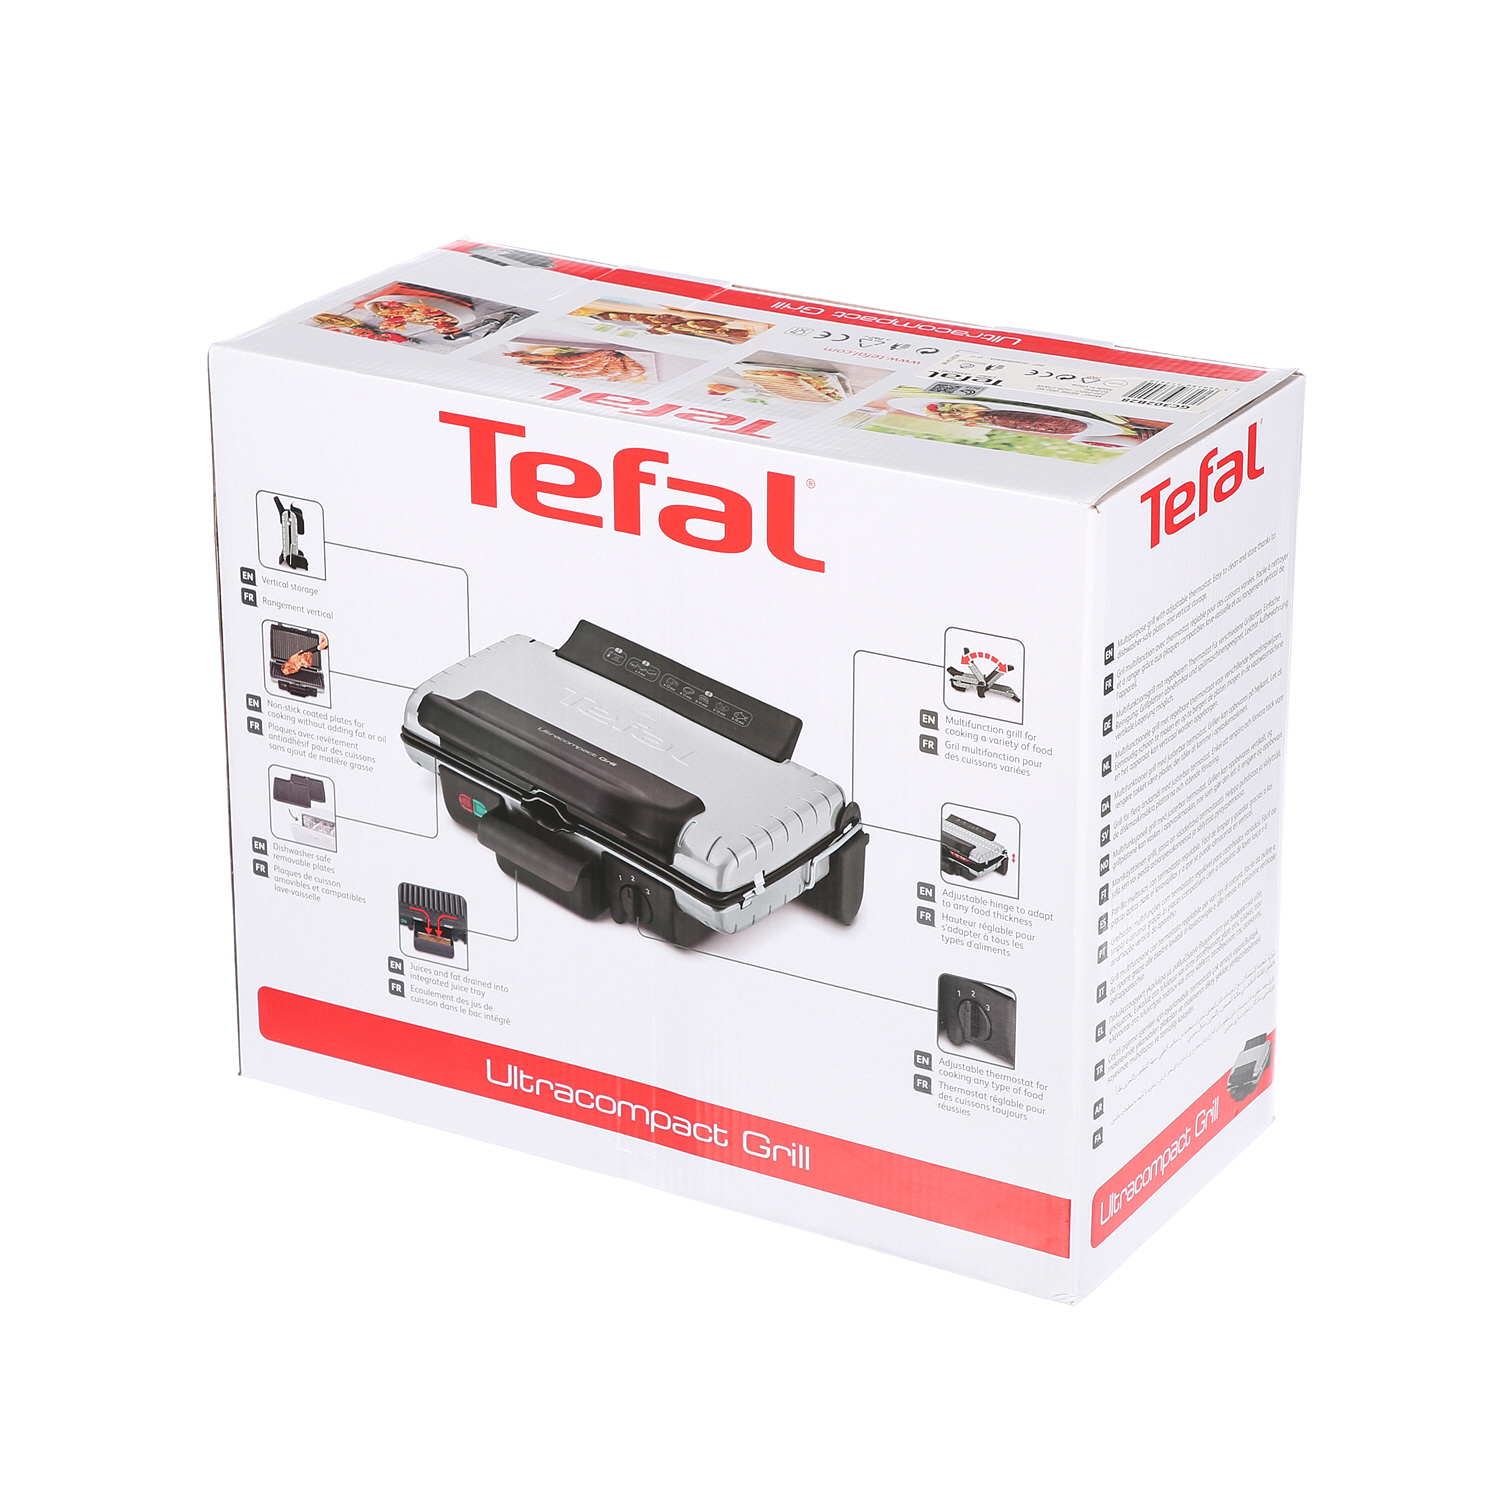 Tefal BBQ Grill Compact 600